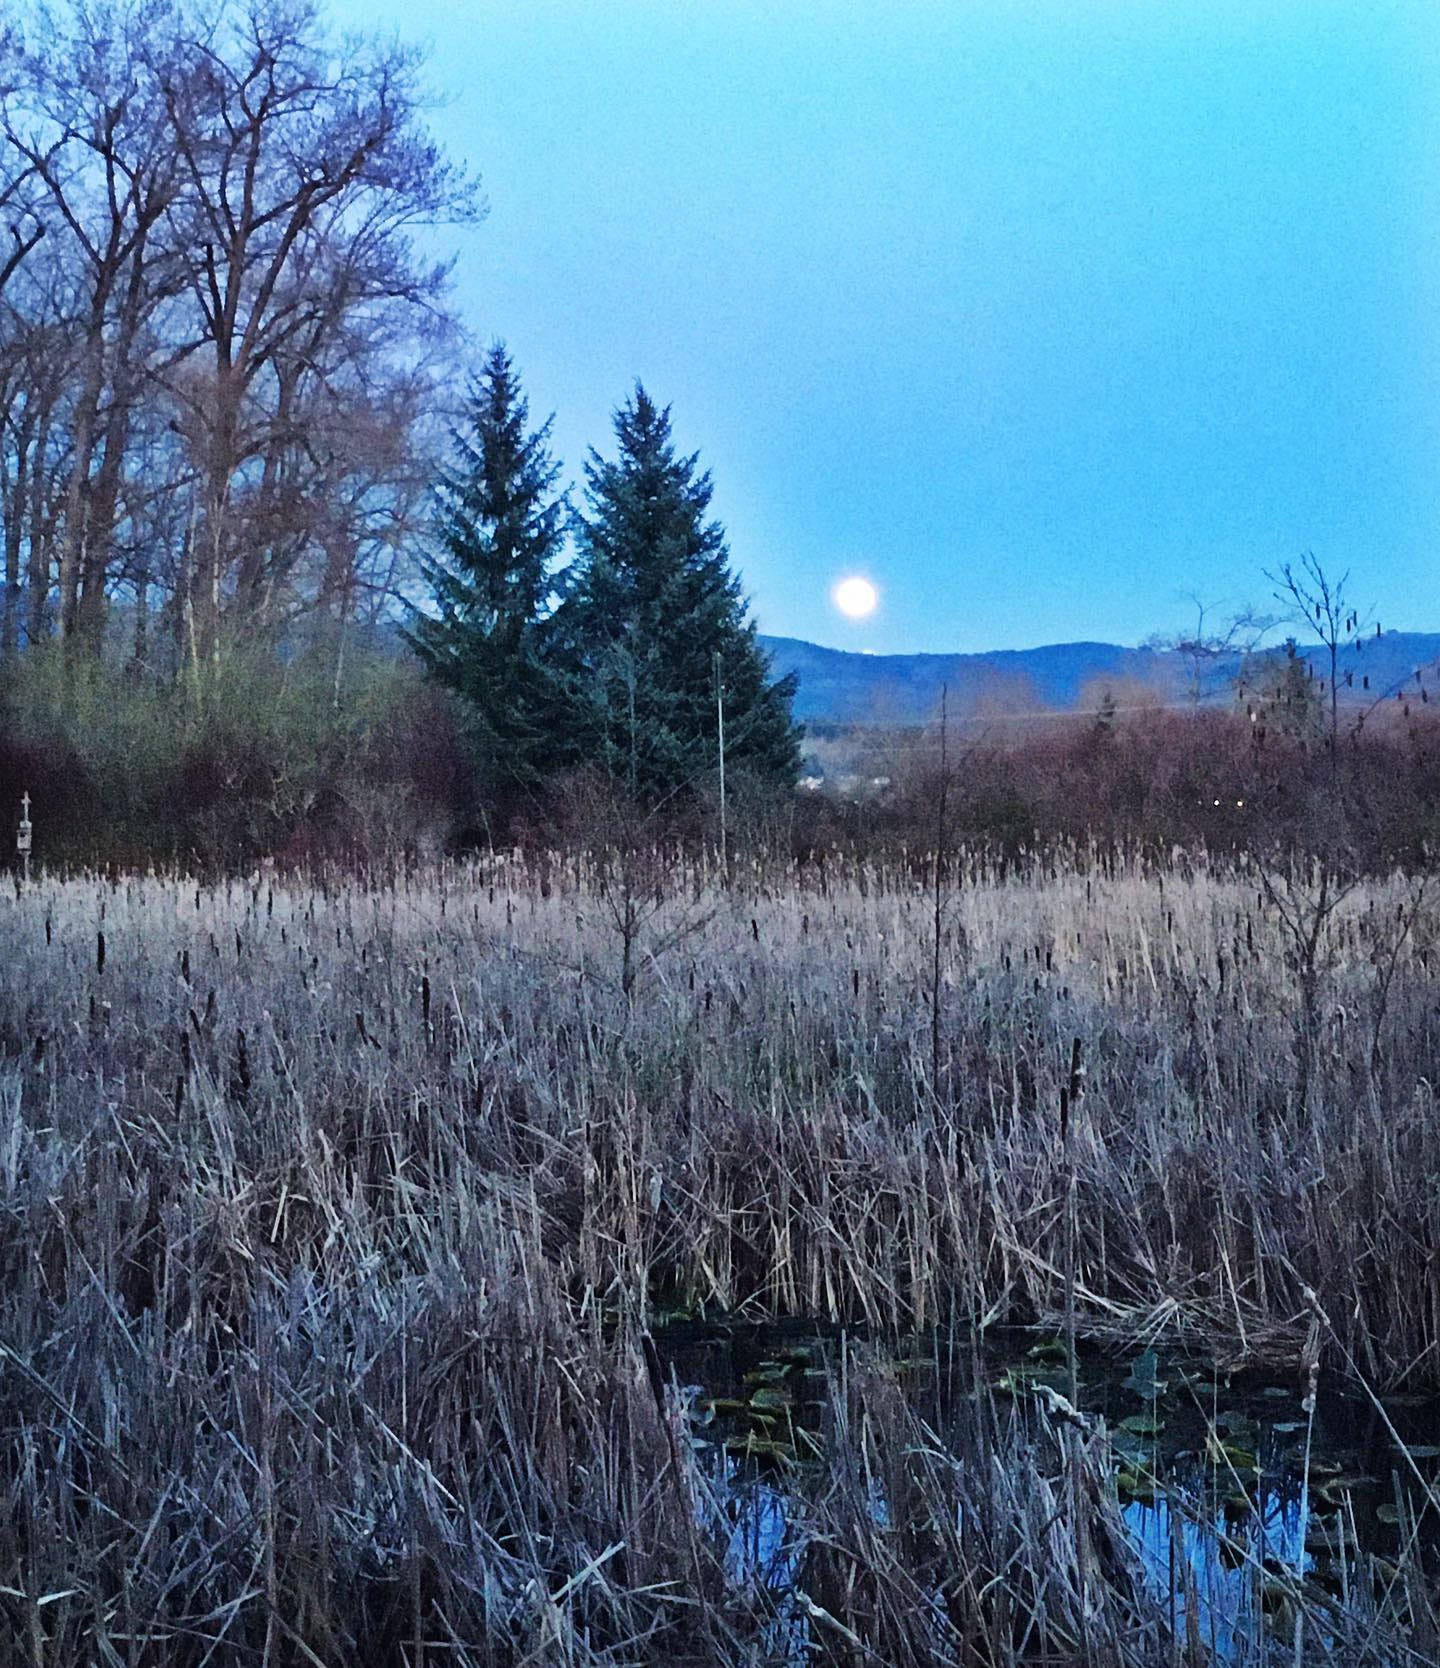 Full moon rises over pond, photo by JPC